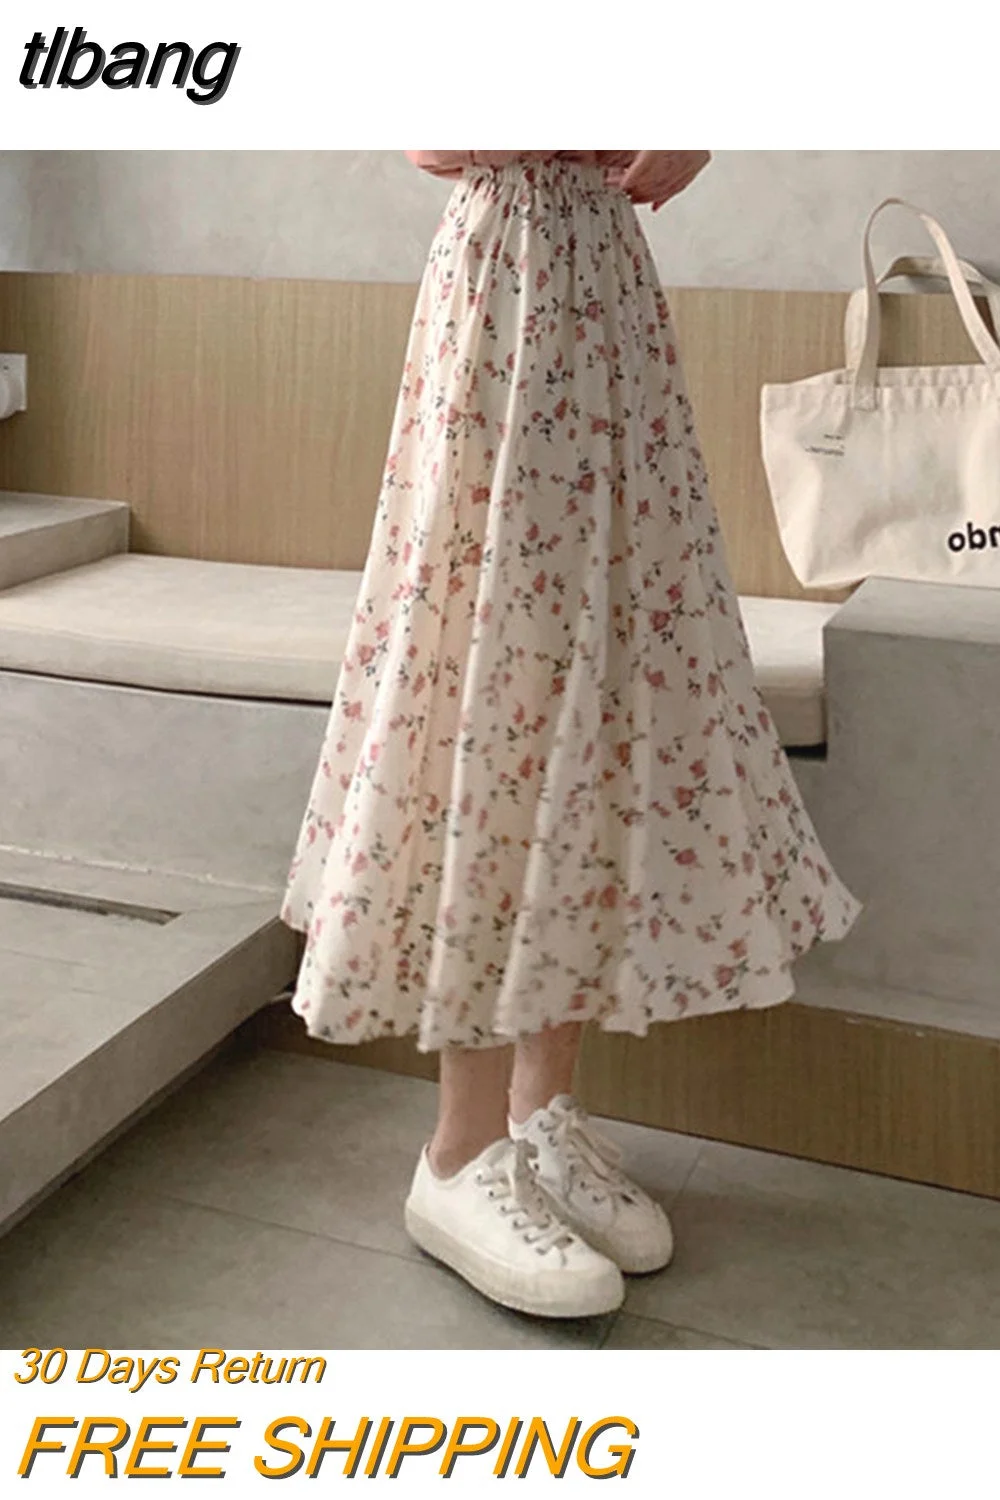 tlbang Women Summer Floral Cozy Girls Leisure Chic High-waist Simple Office Lady Daily Holiday Female A-line Midi Korean Version